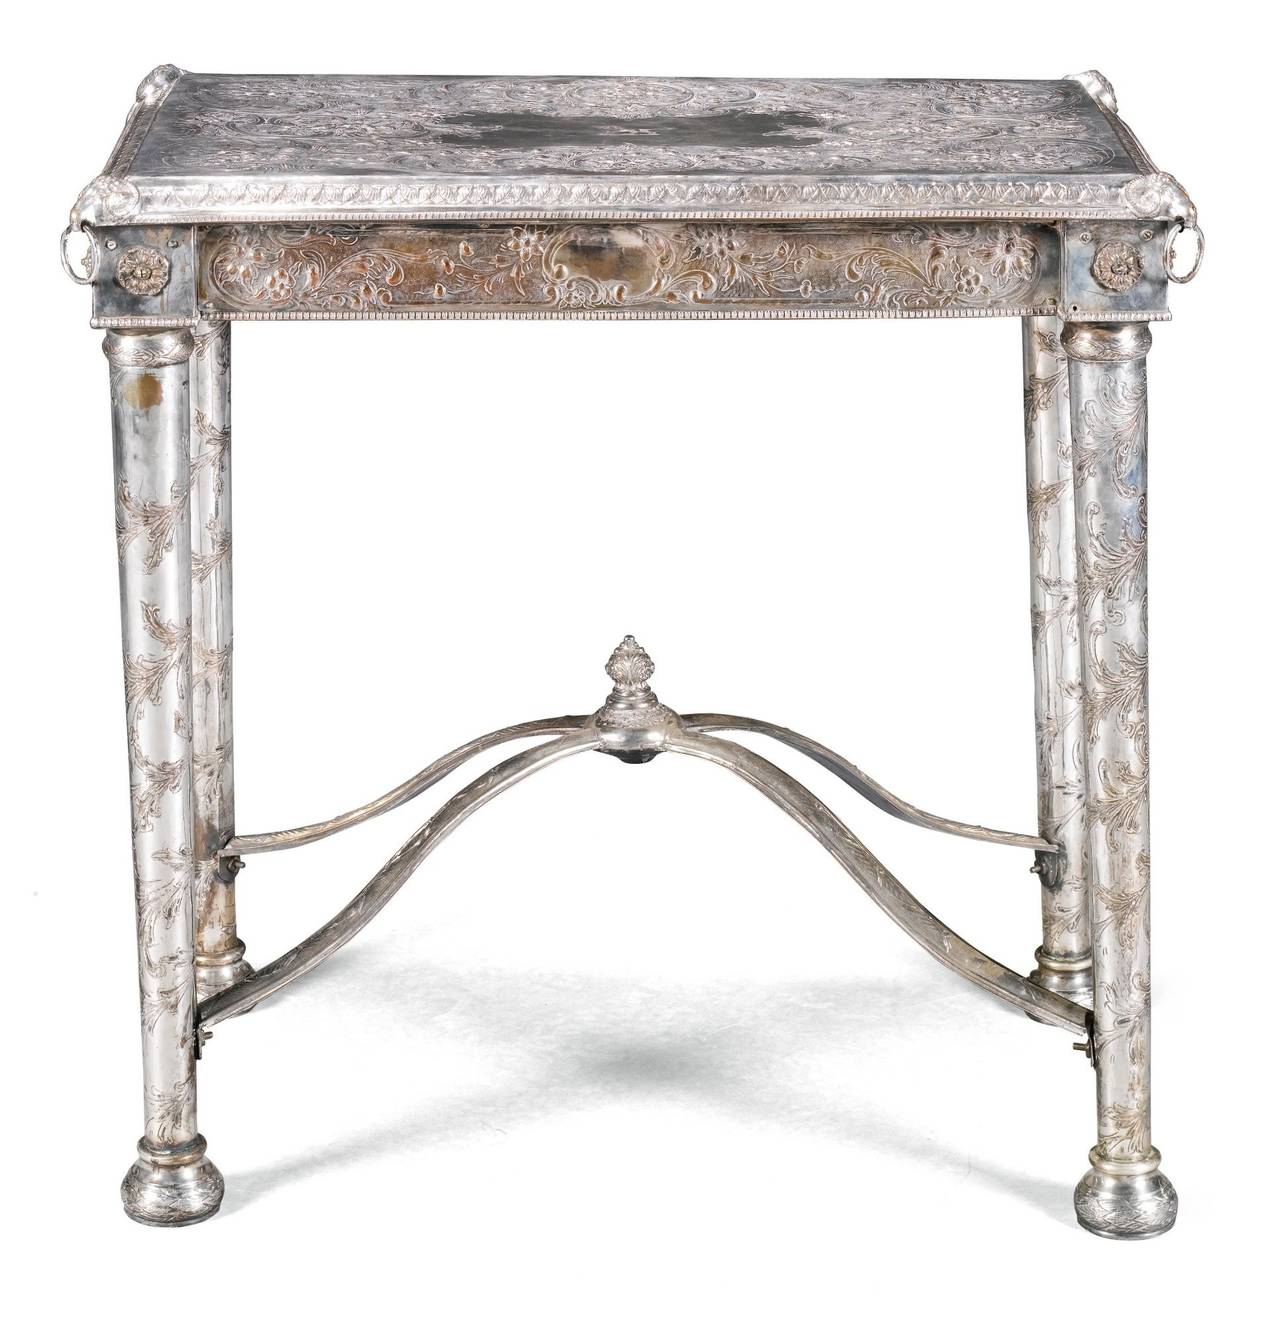 AN ANGLO-INDIAN SILVER PLATED CENTRE TABLE 19TH CENTURY in 18th century manner, the rectangular top with a leaf cast border, embossed with scrolls and flowers around a central panel engraved with a crest depicting a lion, the frieze with conforming